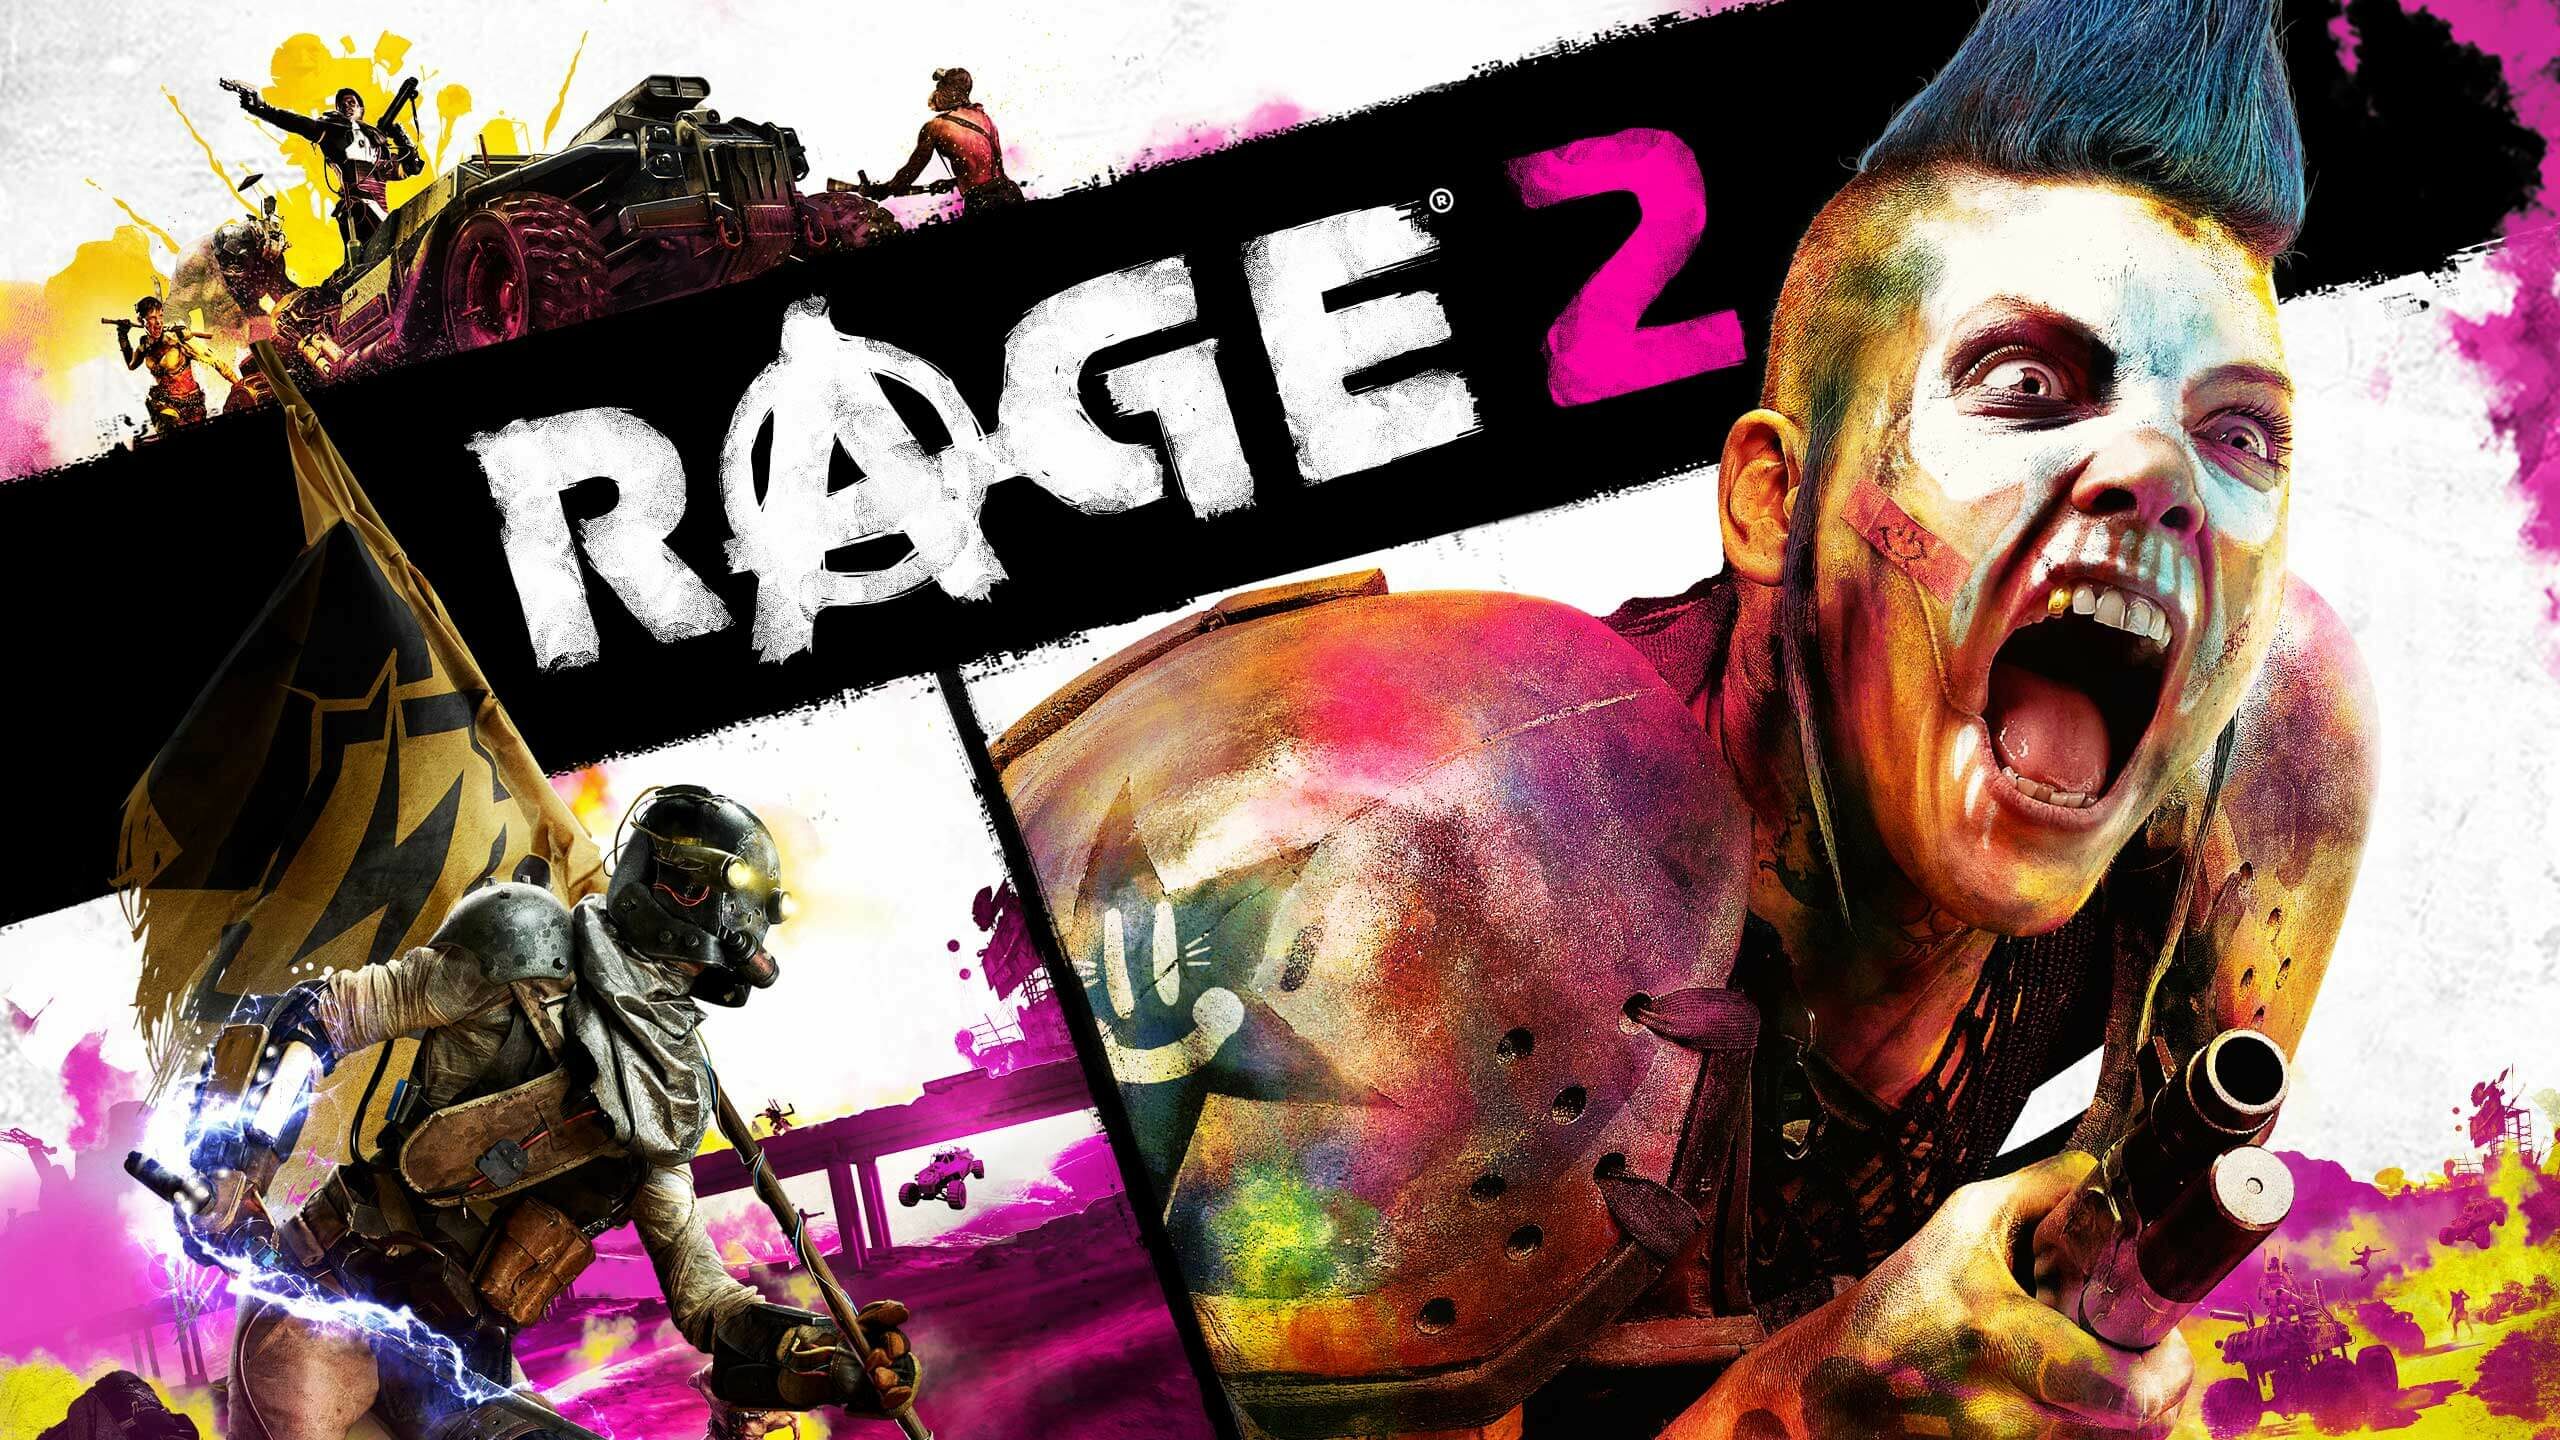 Rage 2: Deluxe Edition free on EGS with prime gaming : r/EpicGamesPC